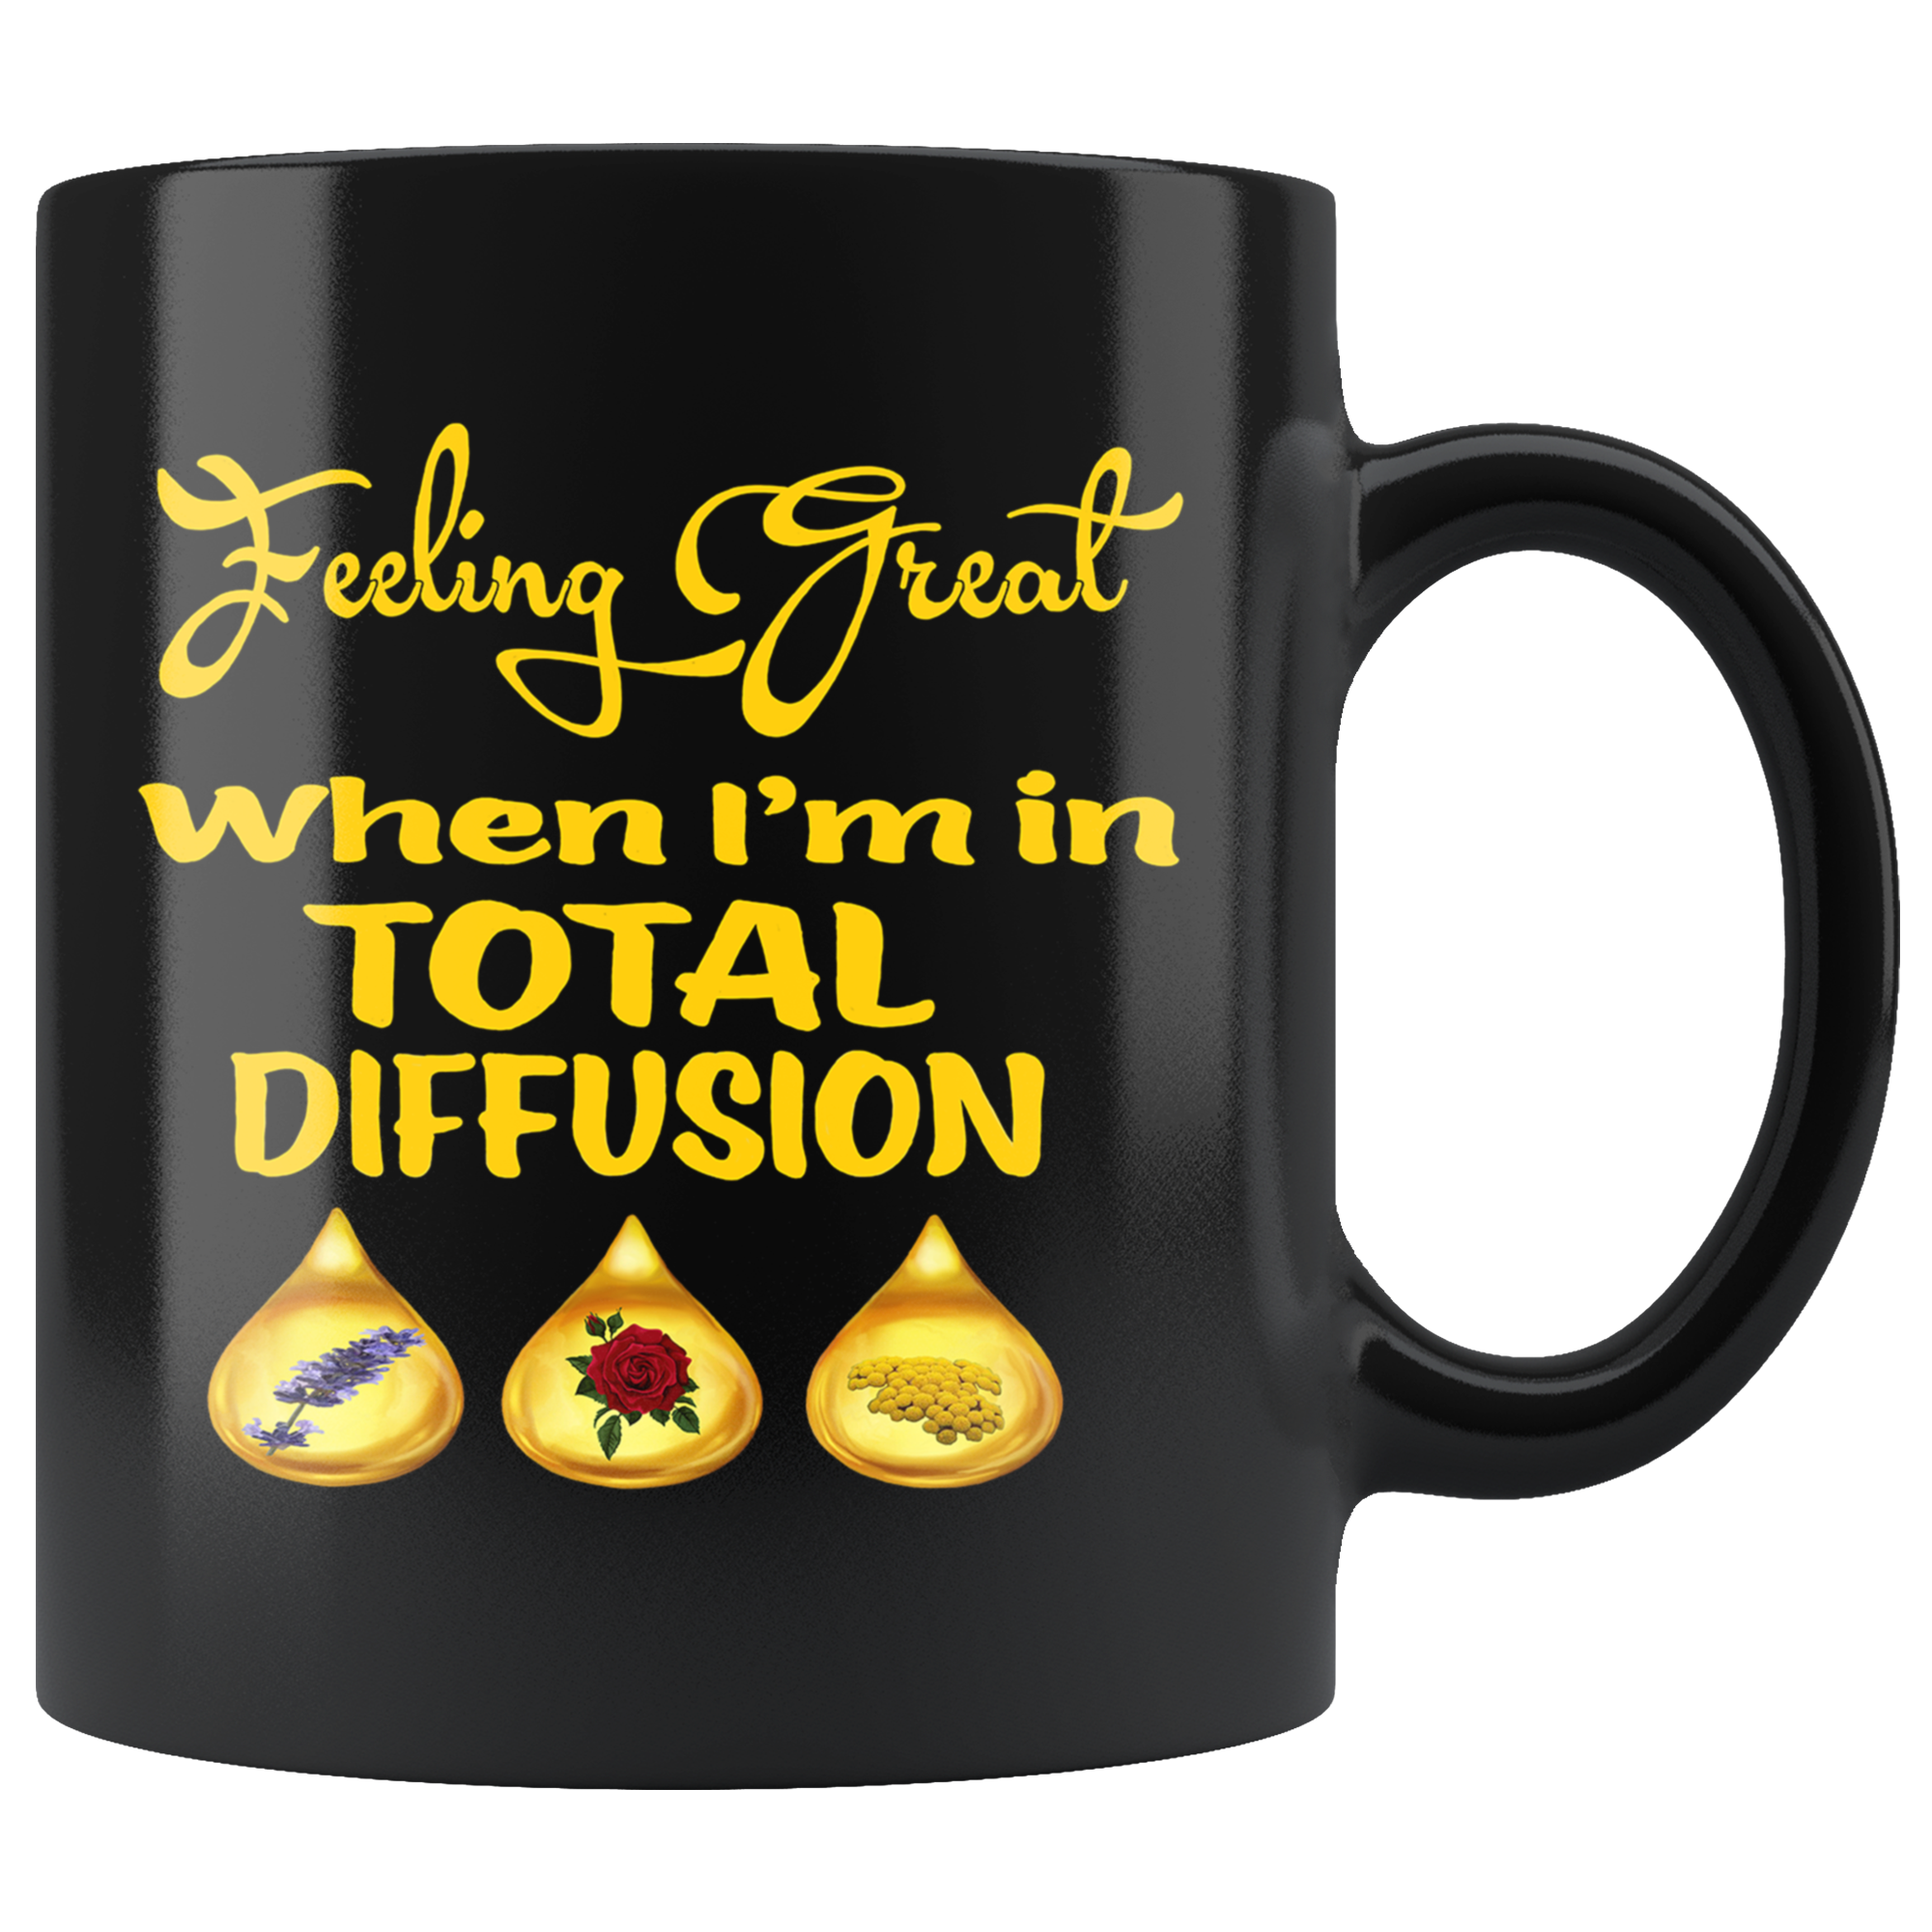 FEELING GREAT WHEN I'M IN TOTAL DIFFUSION